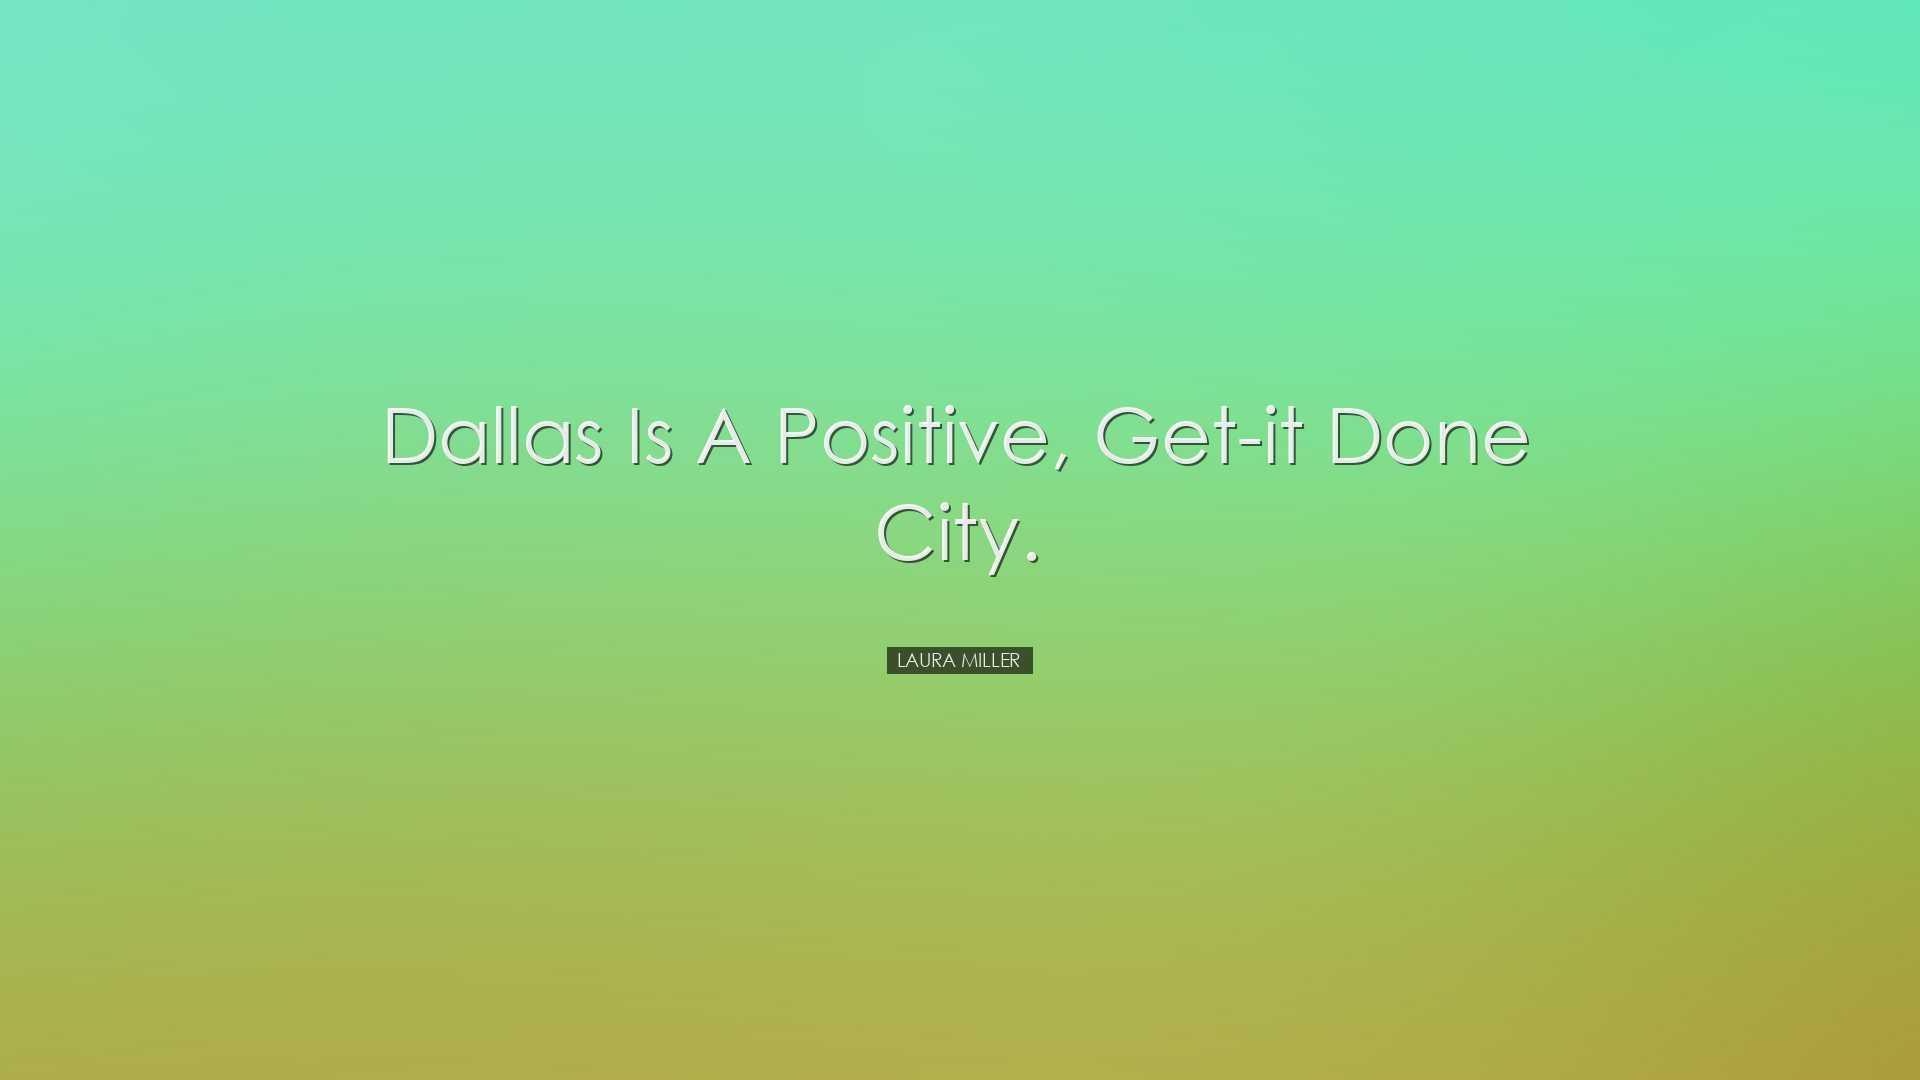 Dallas is a positive, get-it done city. - Laura Miller